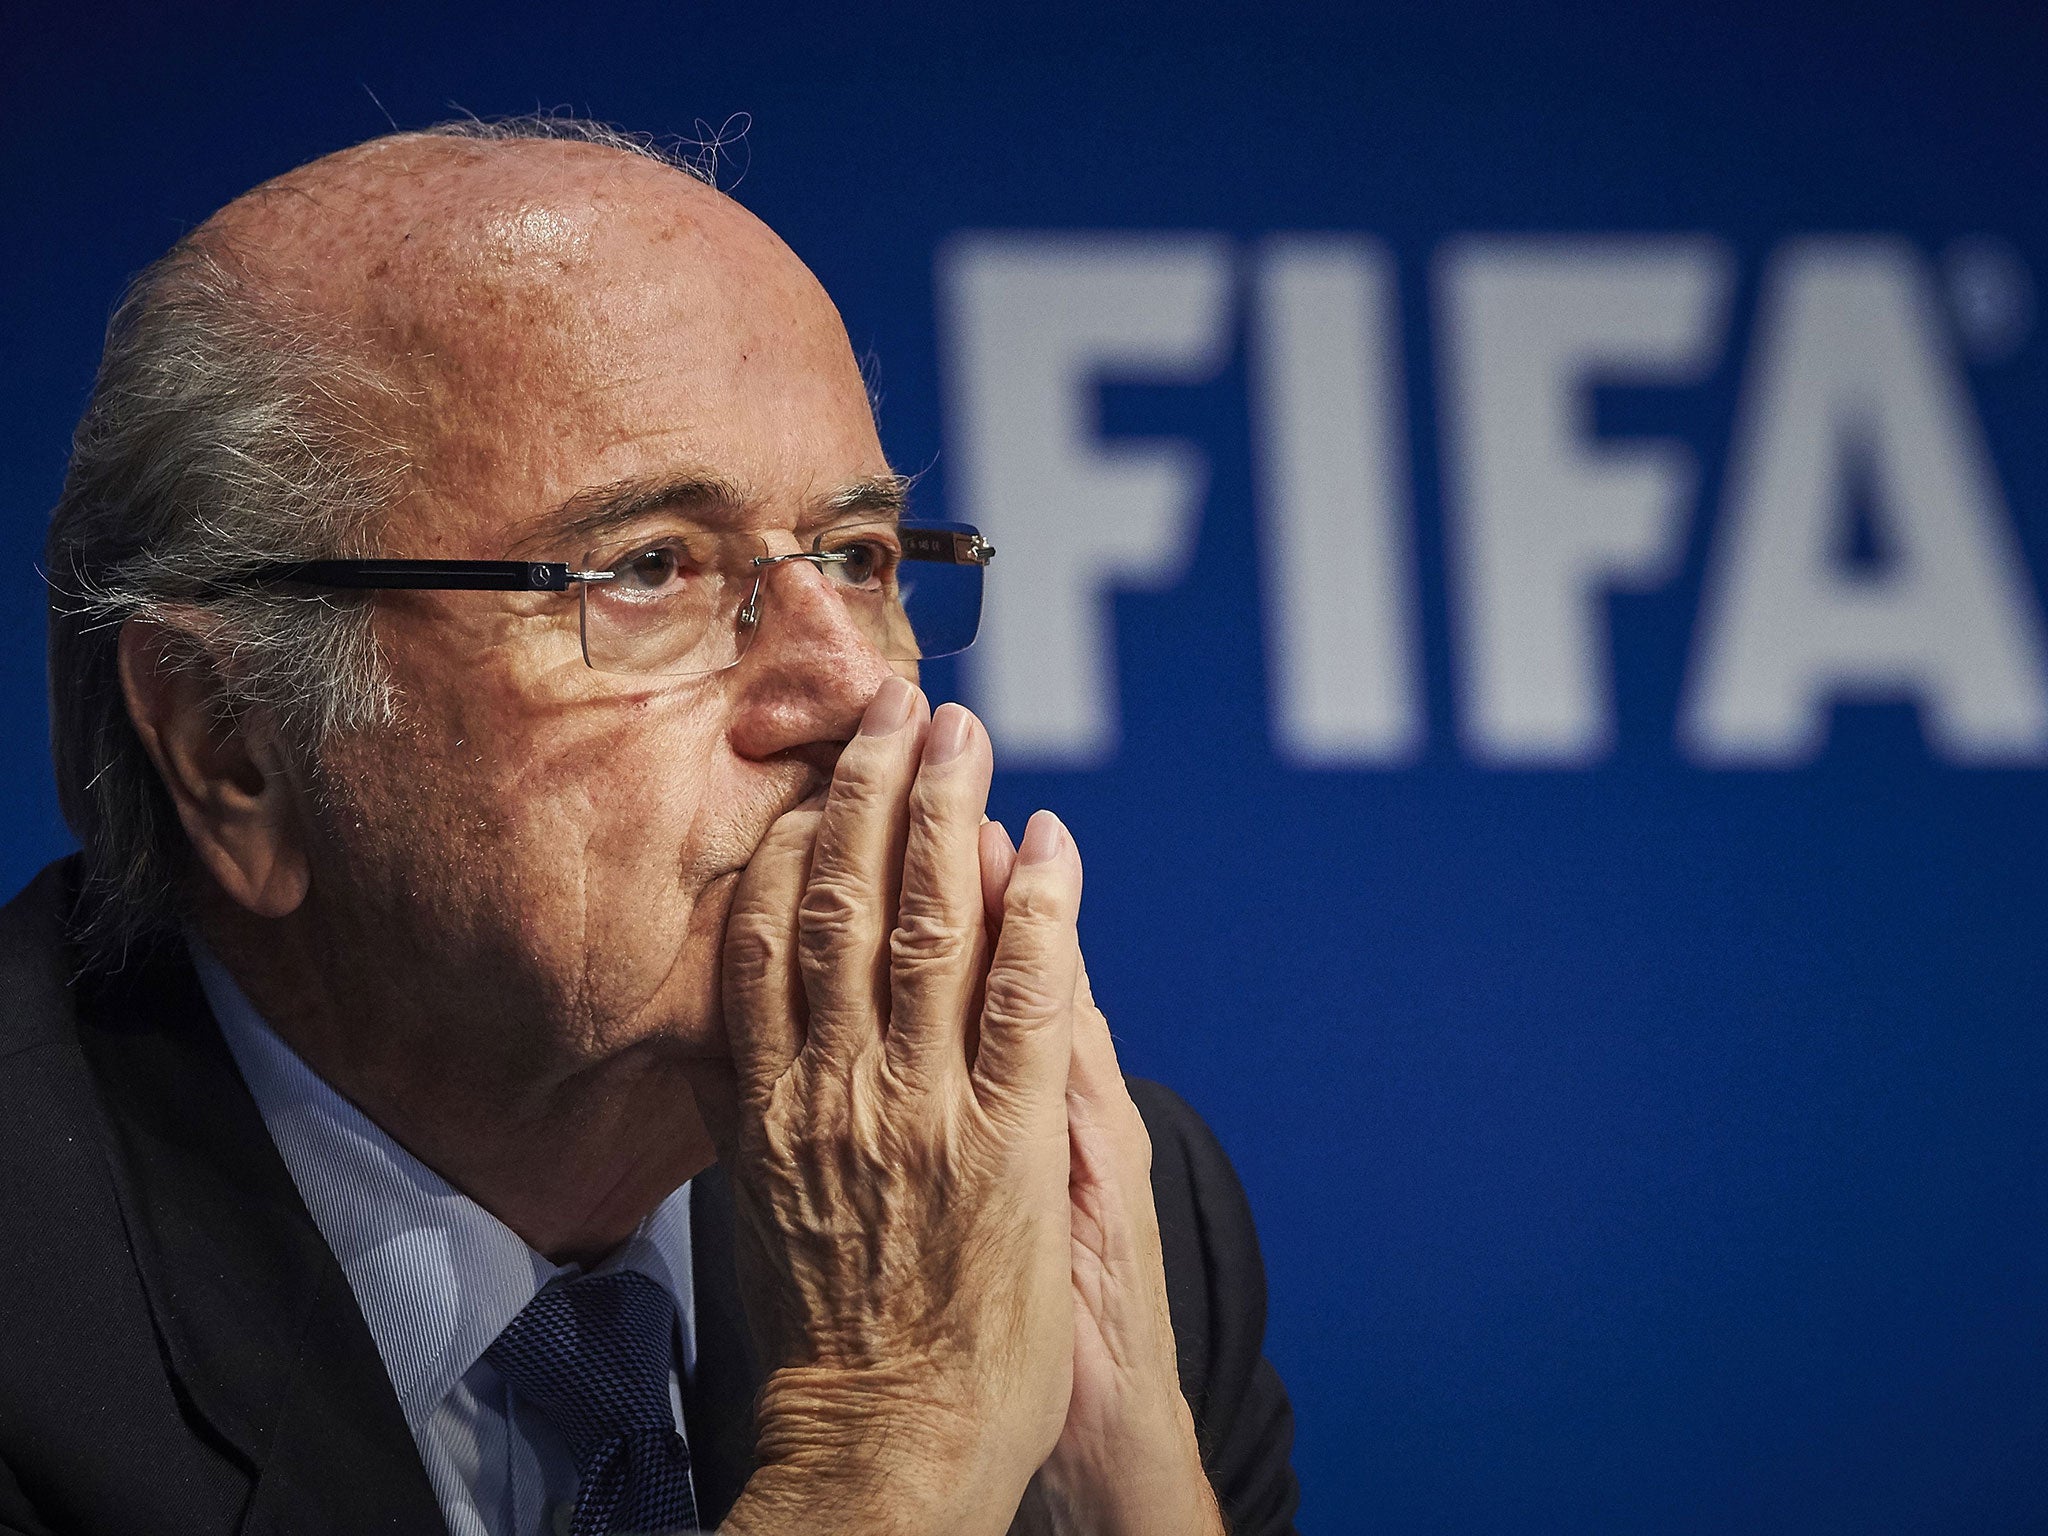 Platini has told Blatter face-to-face that he must quit Fifa